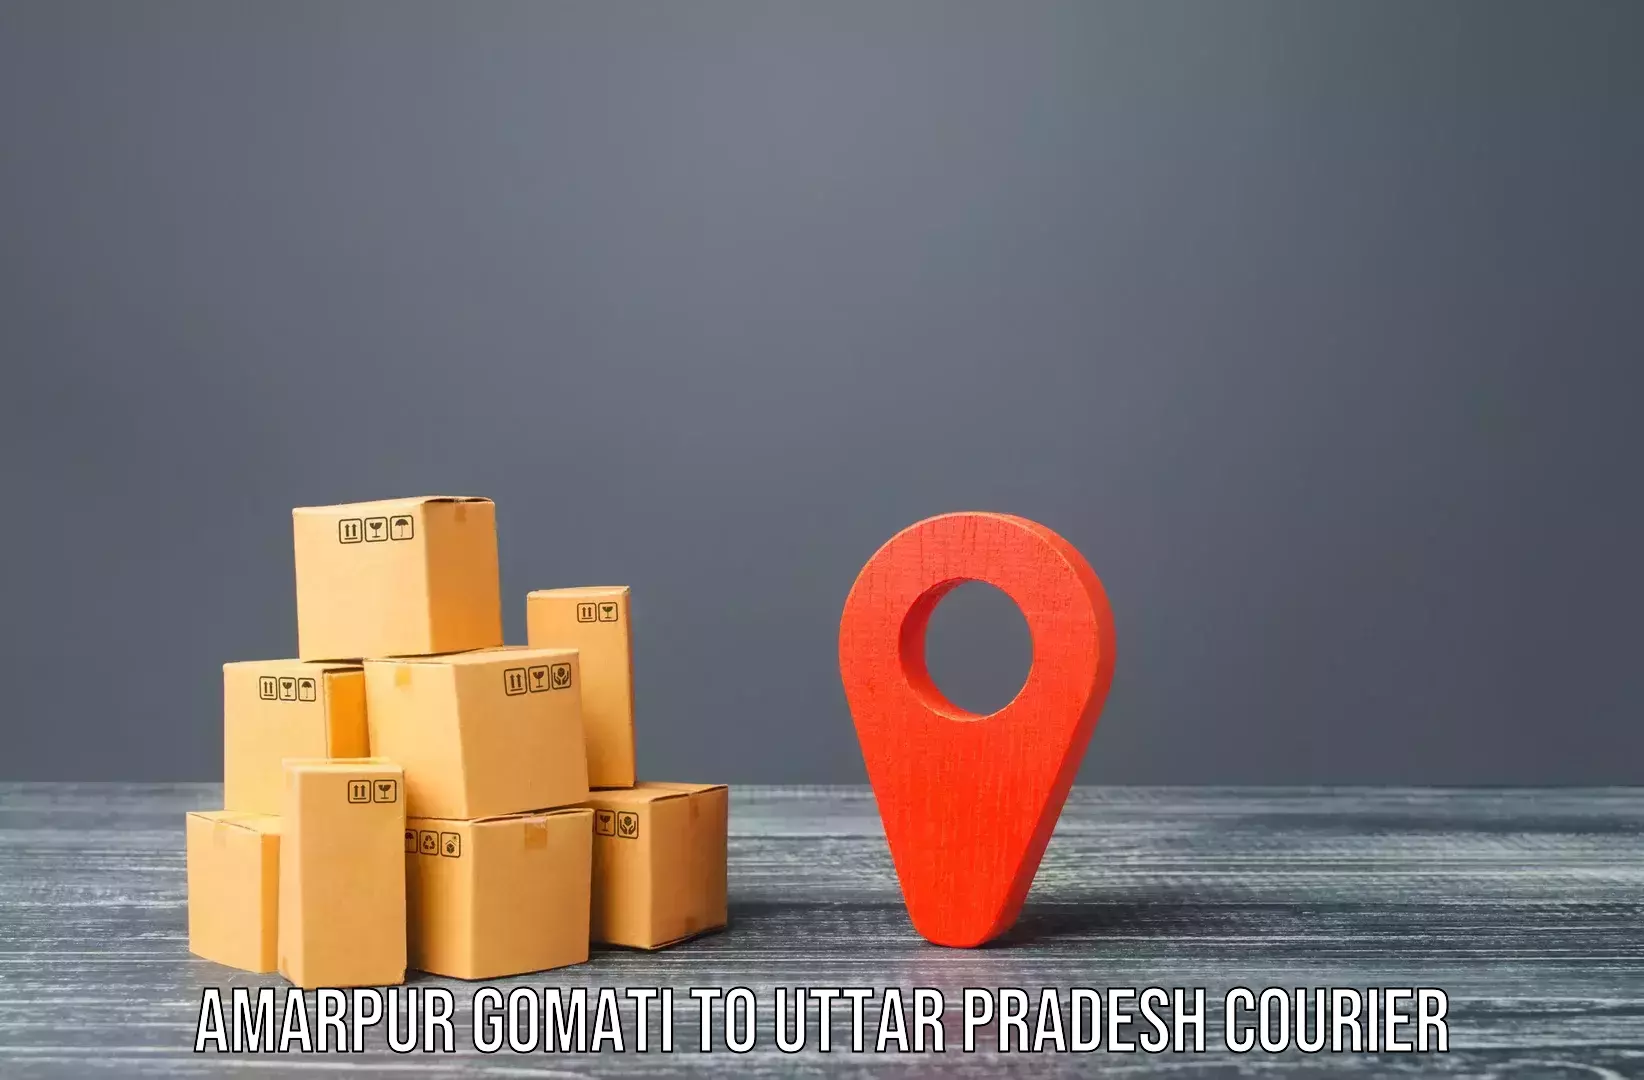 Quality moving and storage in Amarpur Gomati to Ghorawal